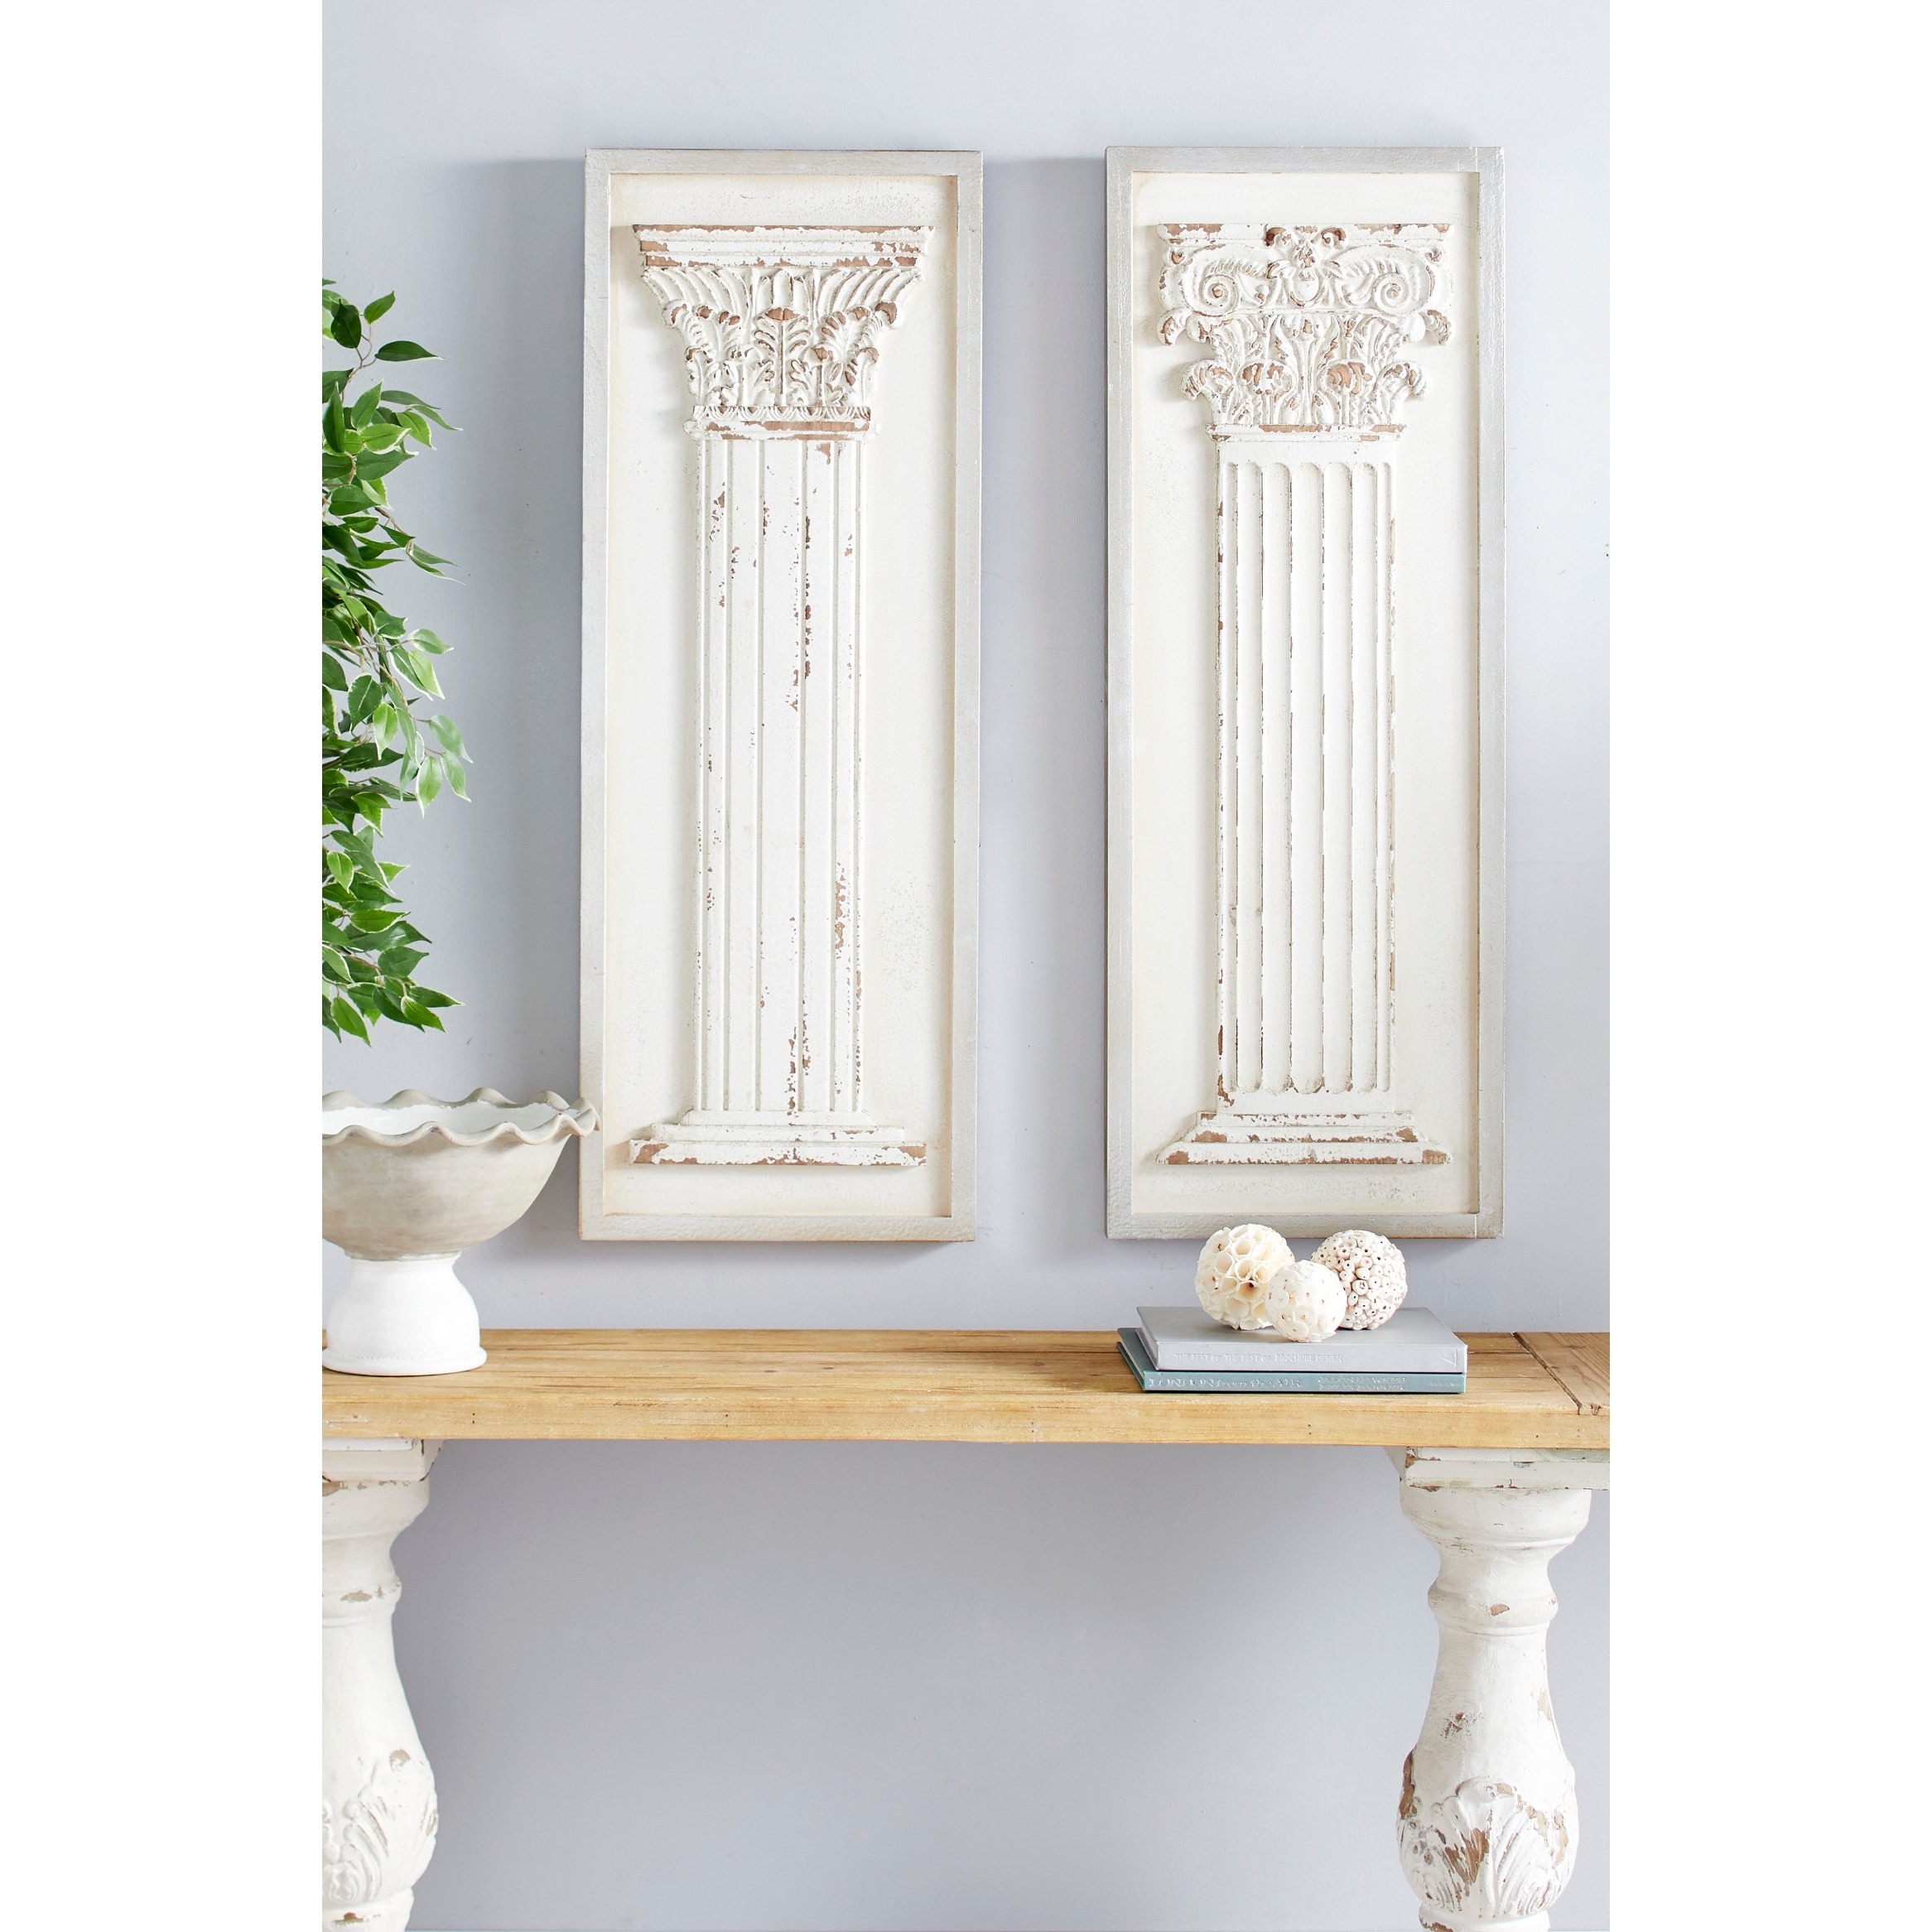 White Wood Vintage Wall Decor Architecture (Set of 2) On Sale Bed Bath   Beyond 32017322